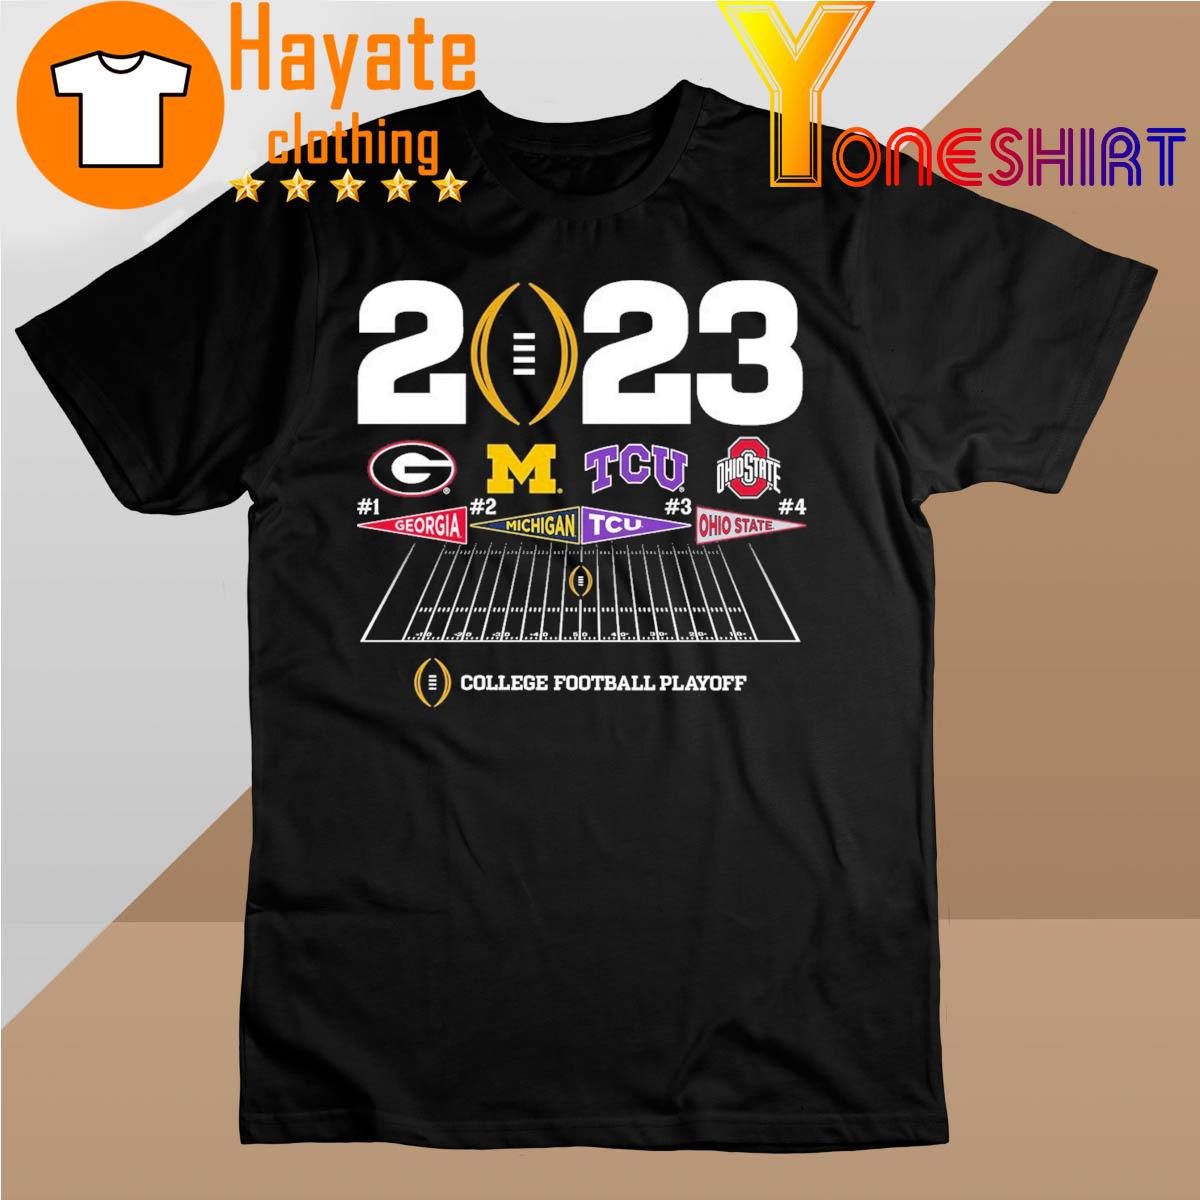 Georgia Bulldogs Michigan Wolverines TCU Horned Frogs and Ohio State Buckeyes 2023 College Football Playoff shirt